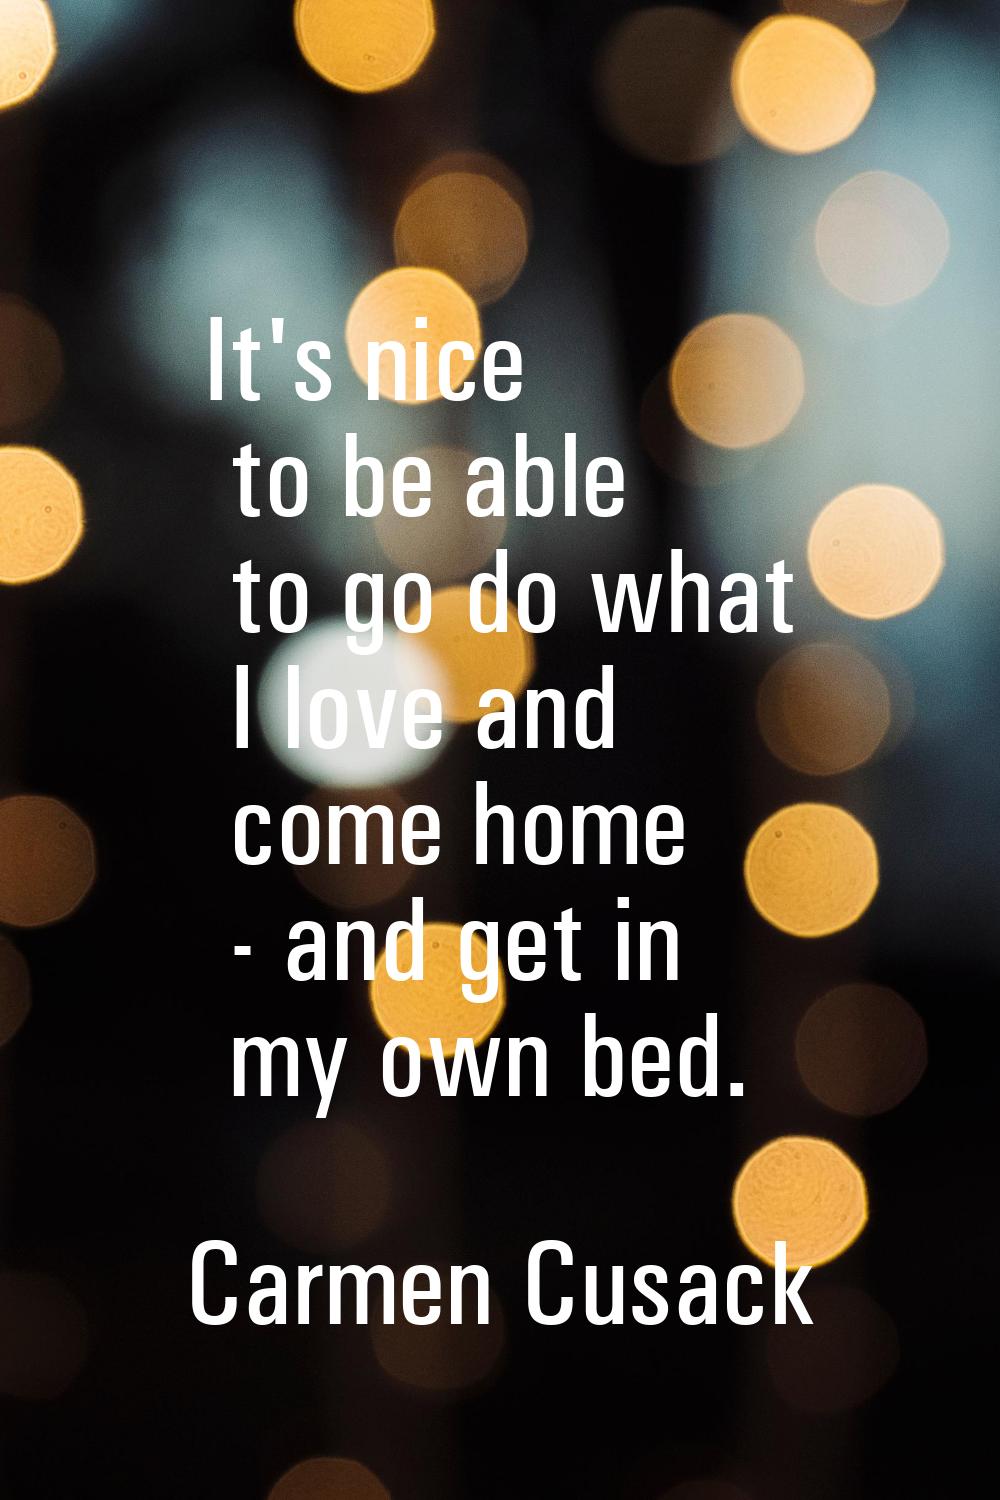 It's nice to be able to go do what I love and come home - and get in my own bed.